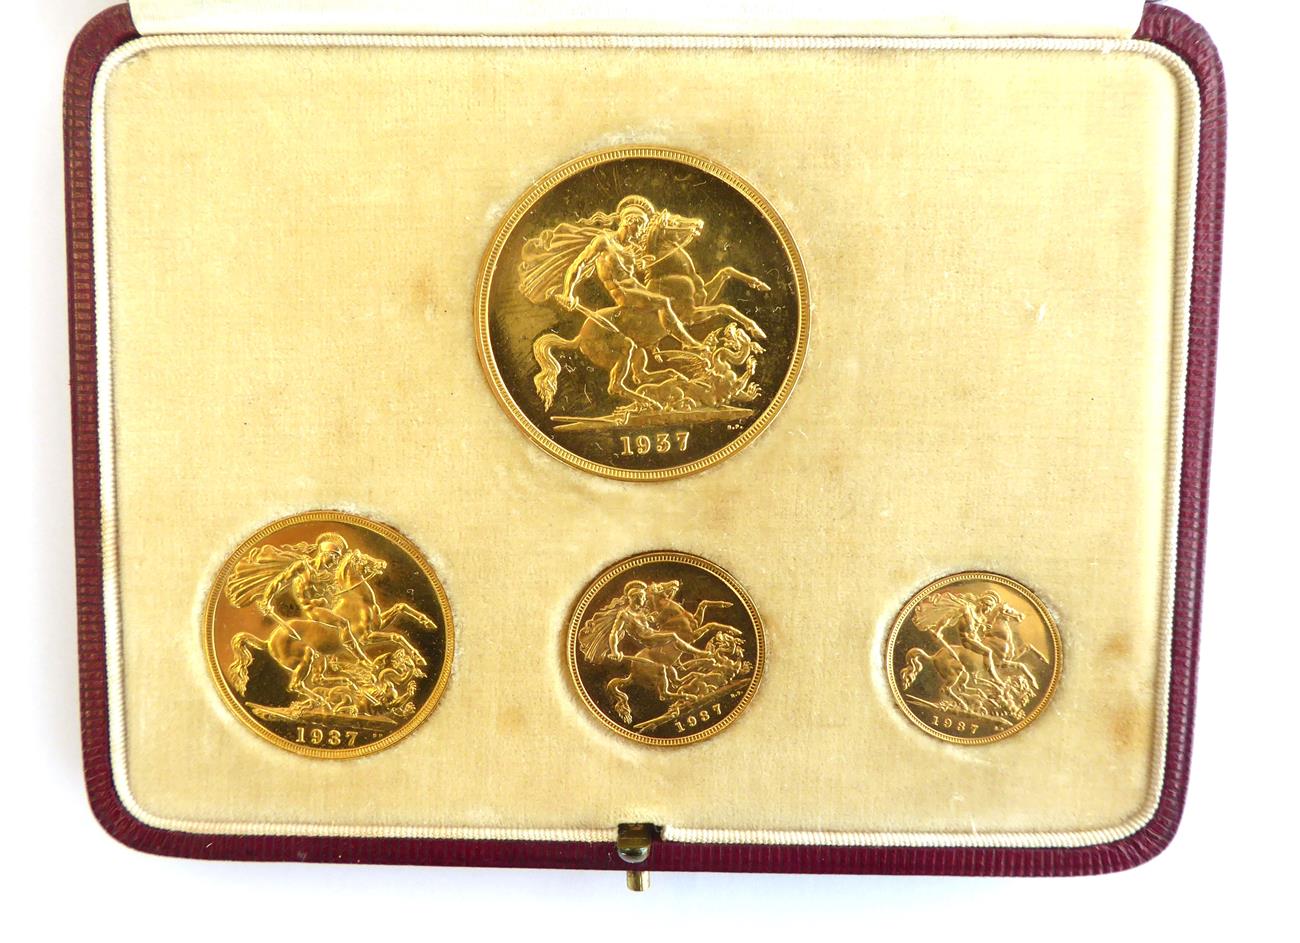 Lot 2003 - 1937 George V Four Coin Gold Proof Set As issued in official original box of issue